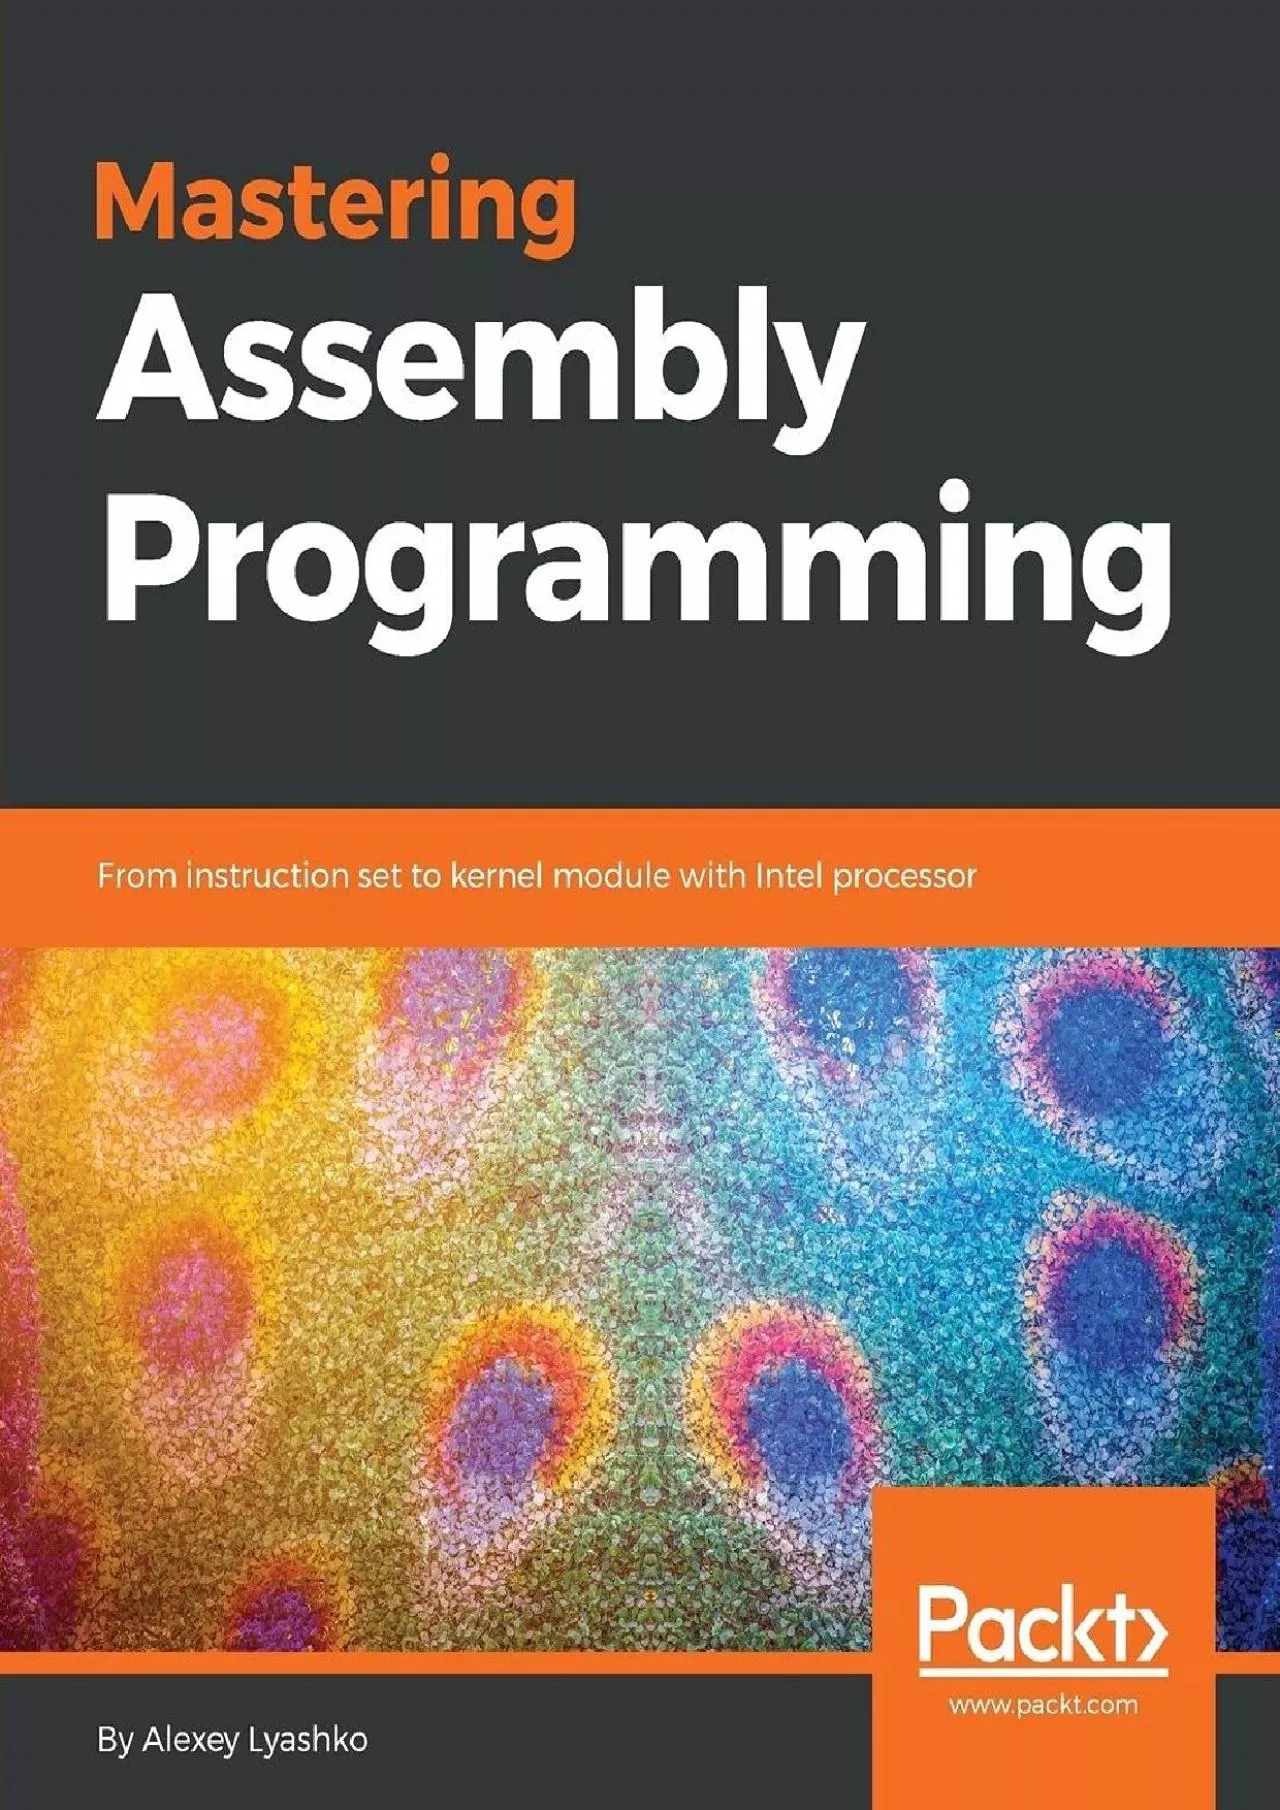 [FREE]-Mastering Assembly Programming: From instruction set to kernel module with Intel